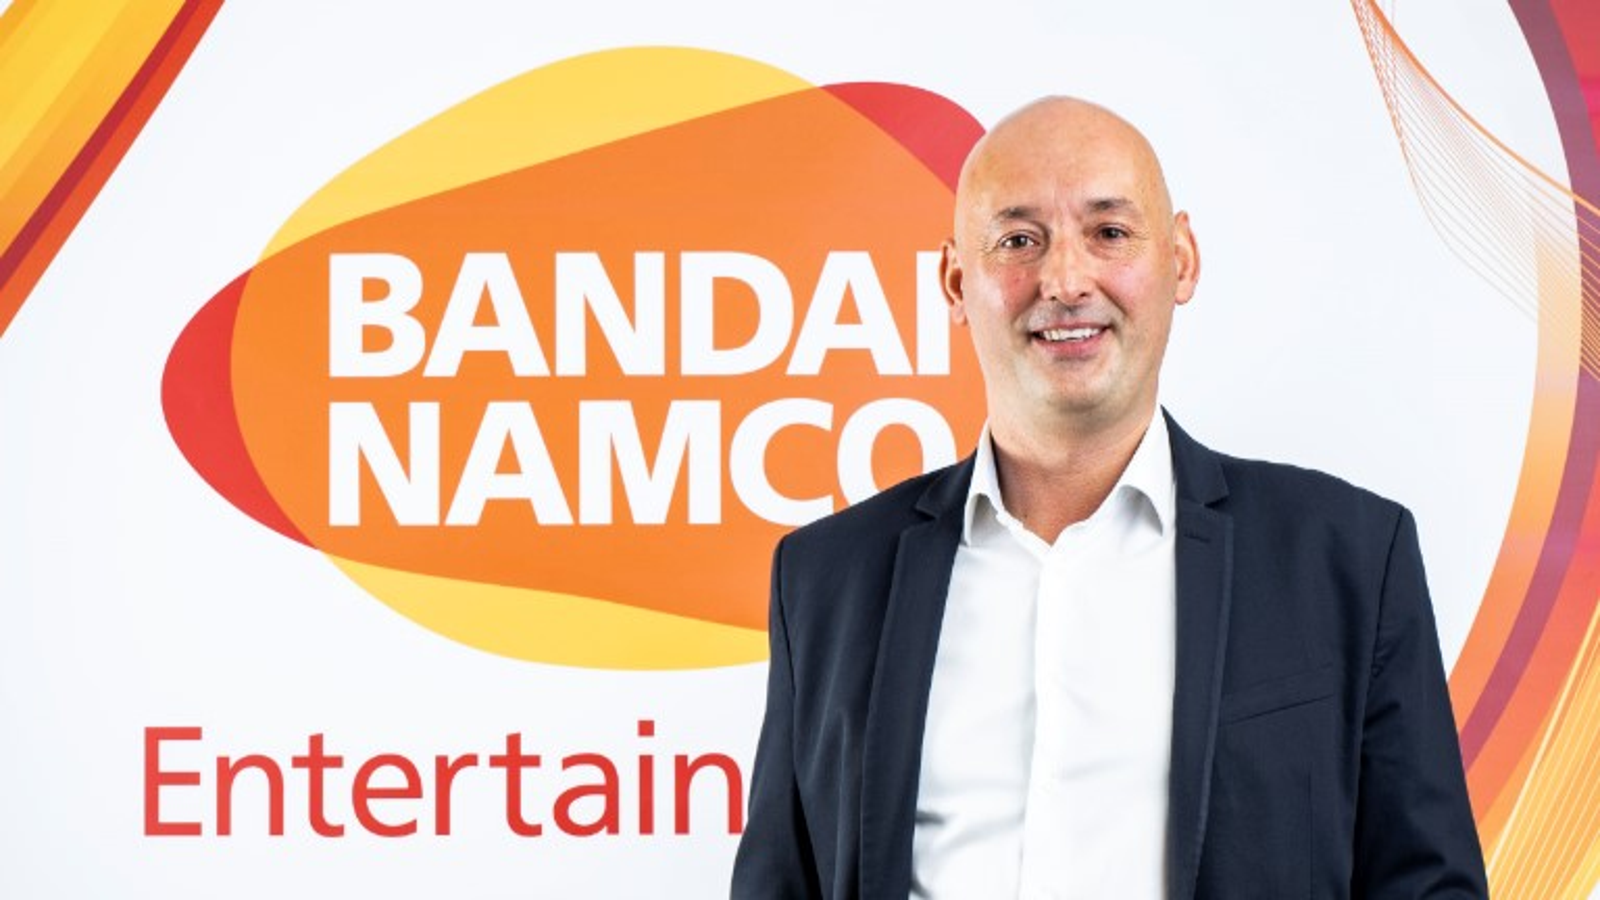 BANDAI NAMCO Entertainment - Get back into the action with the